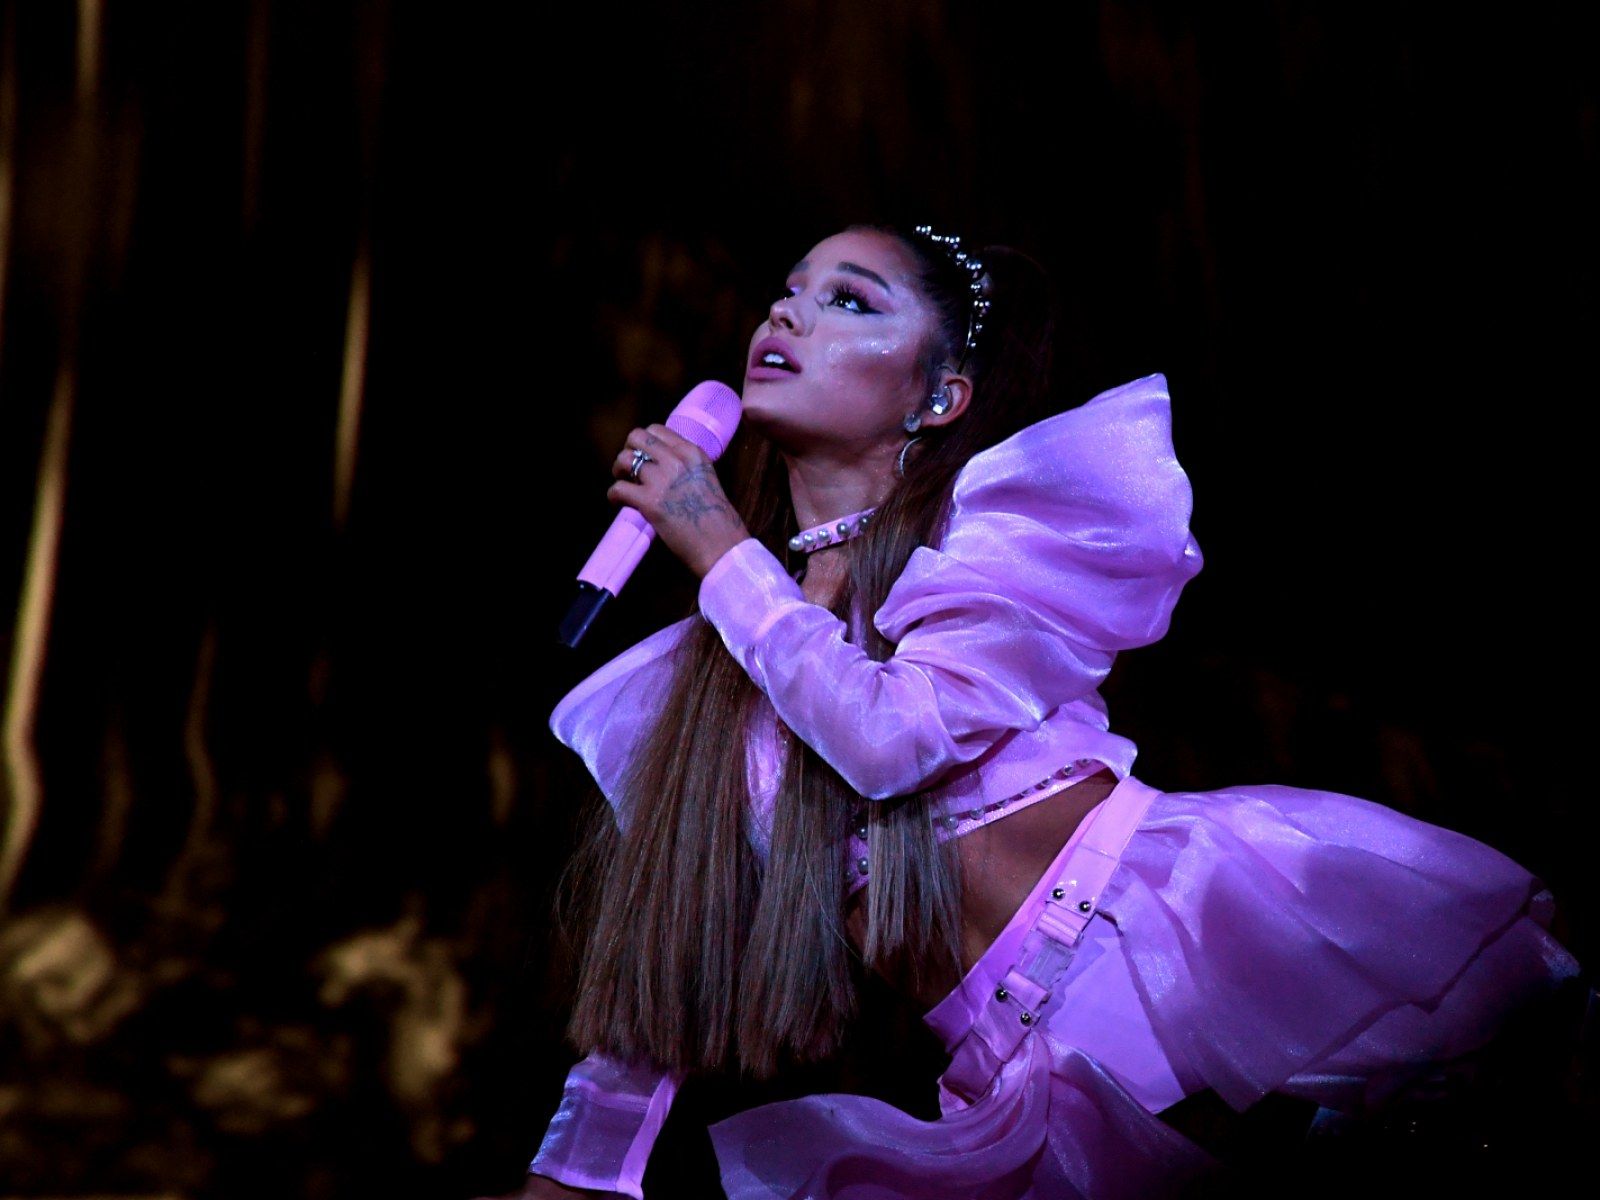 Ariana Grande, Miley Cyrus and Lana Del Rey To Be Included in New